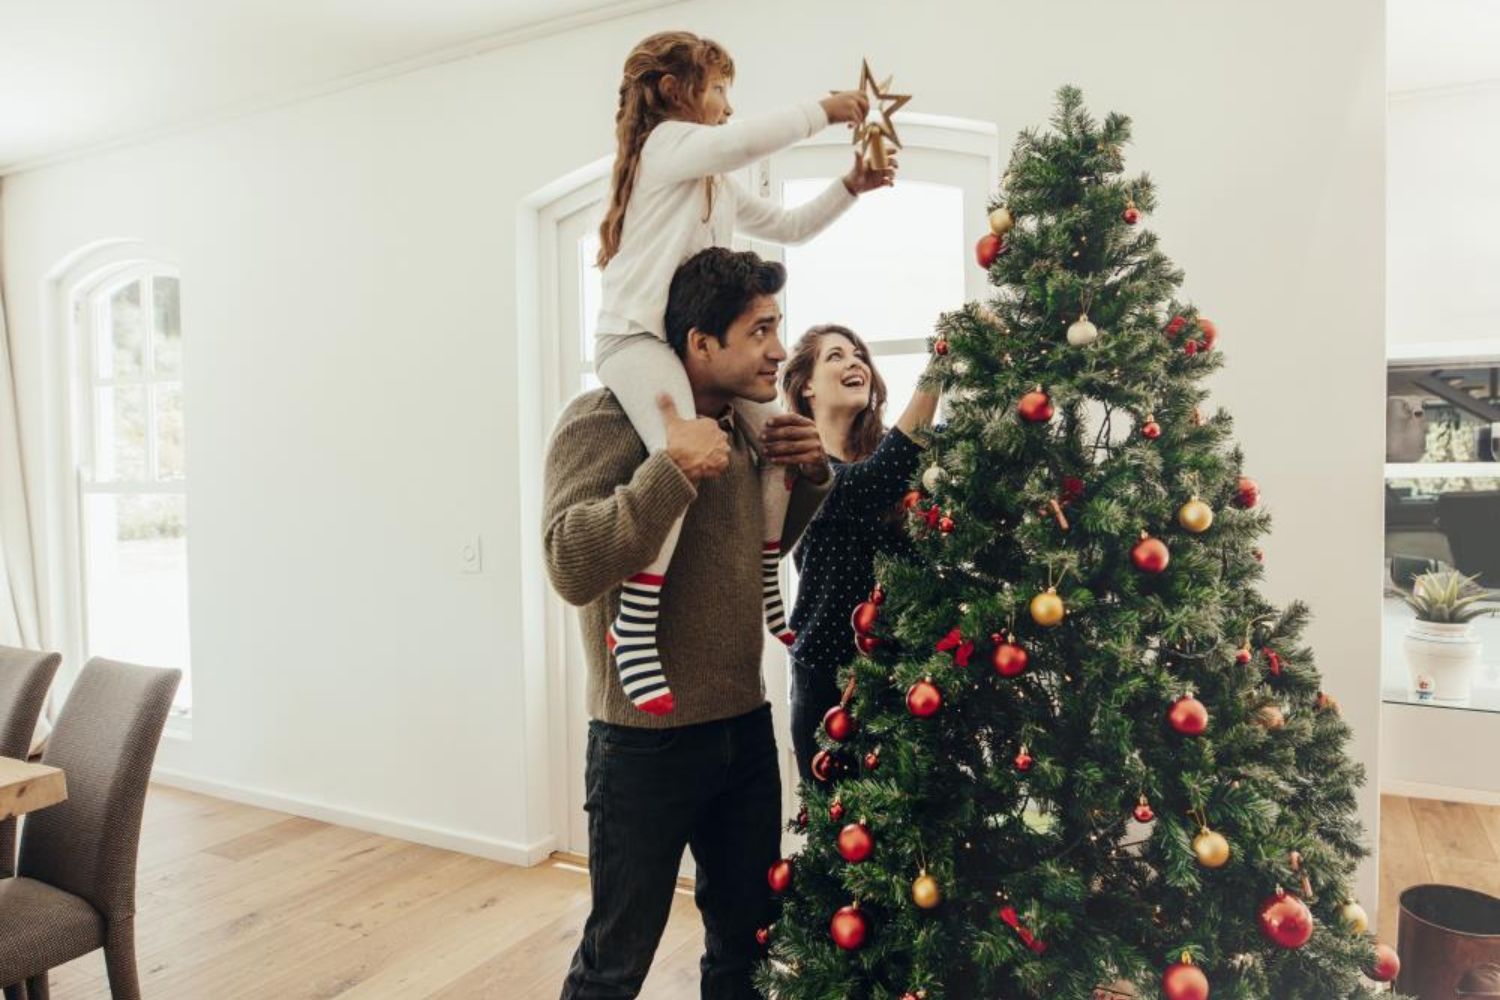 little girl putting the high star on the Christmas tree on her father's shoulder